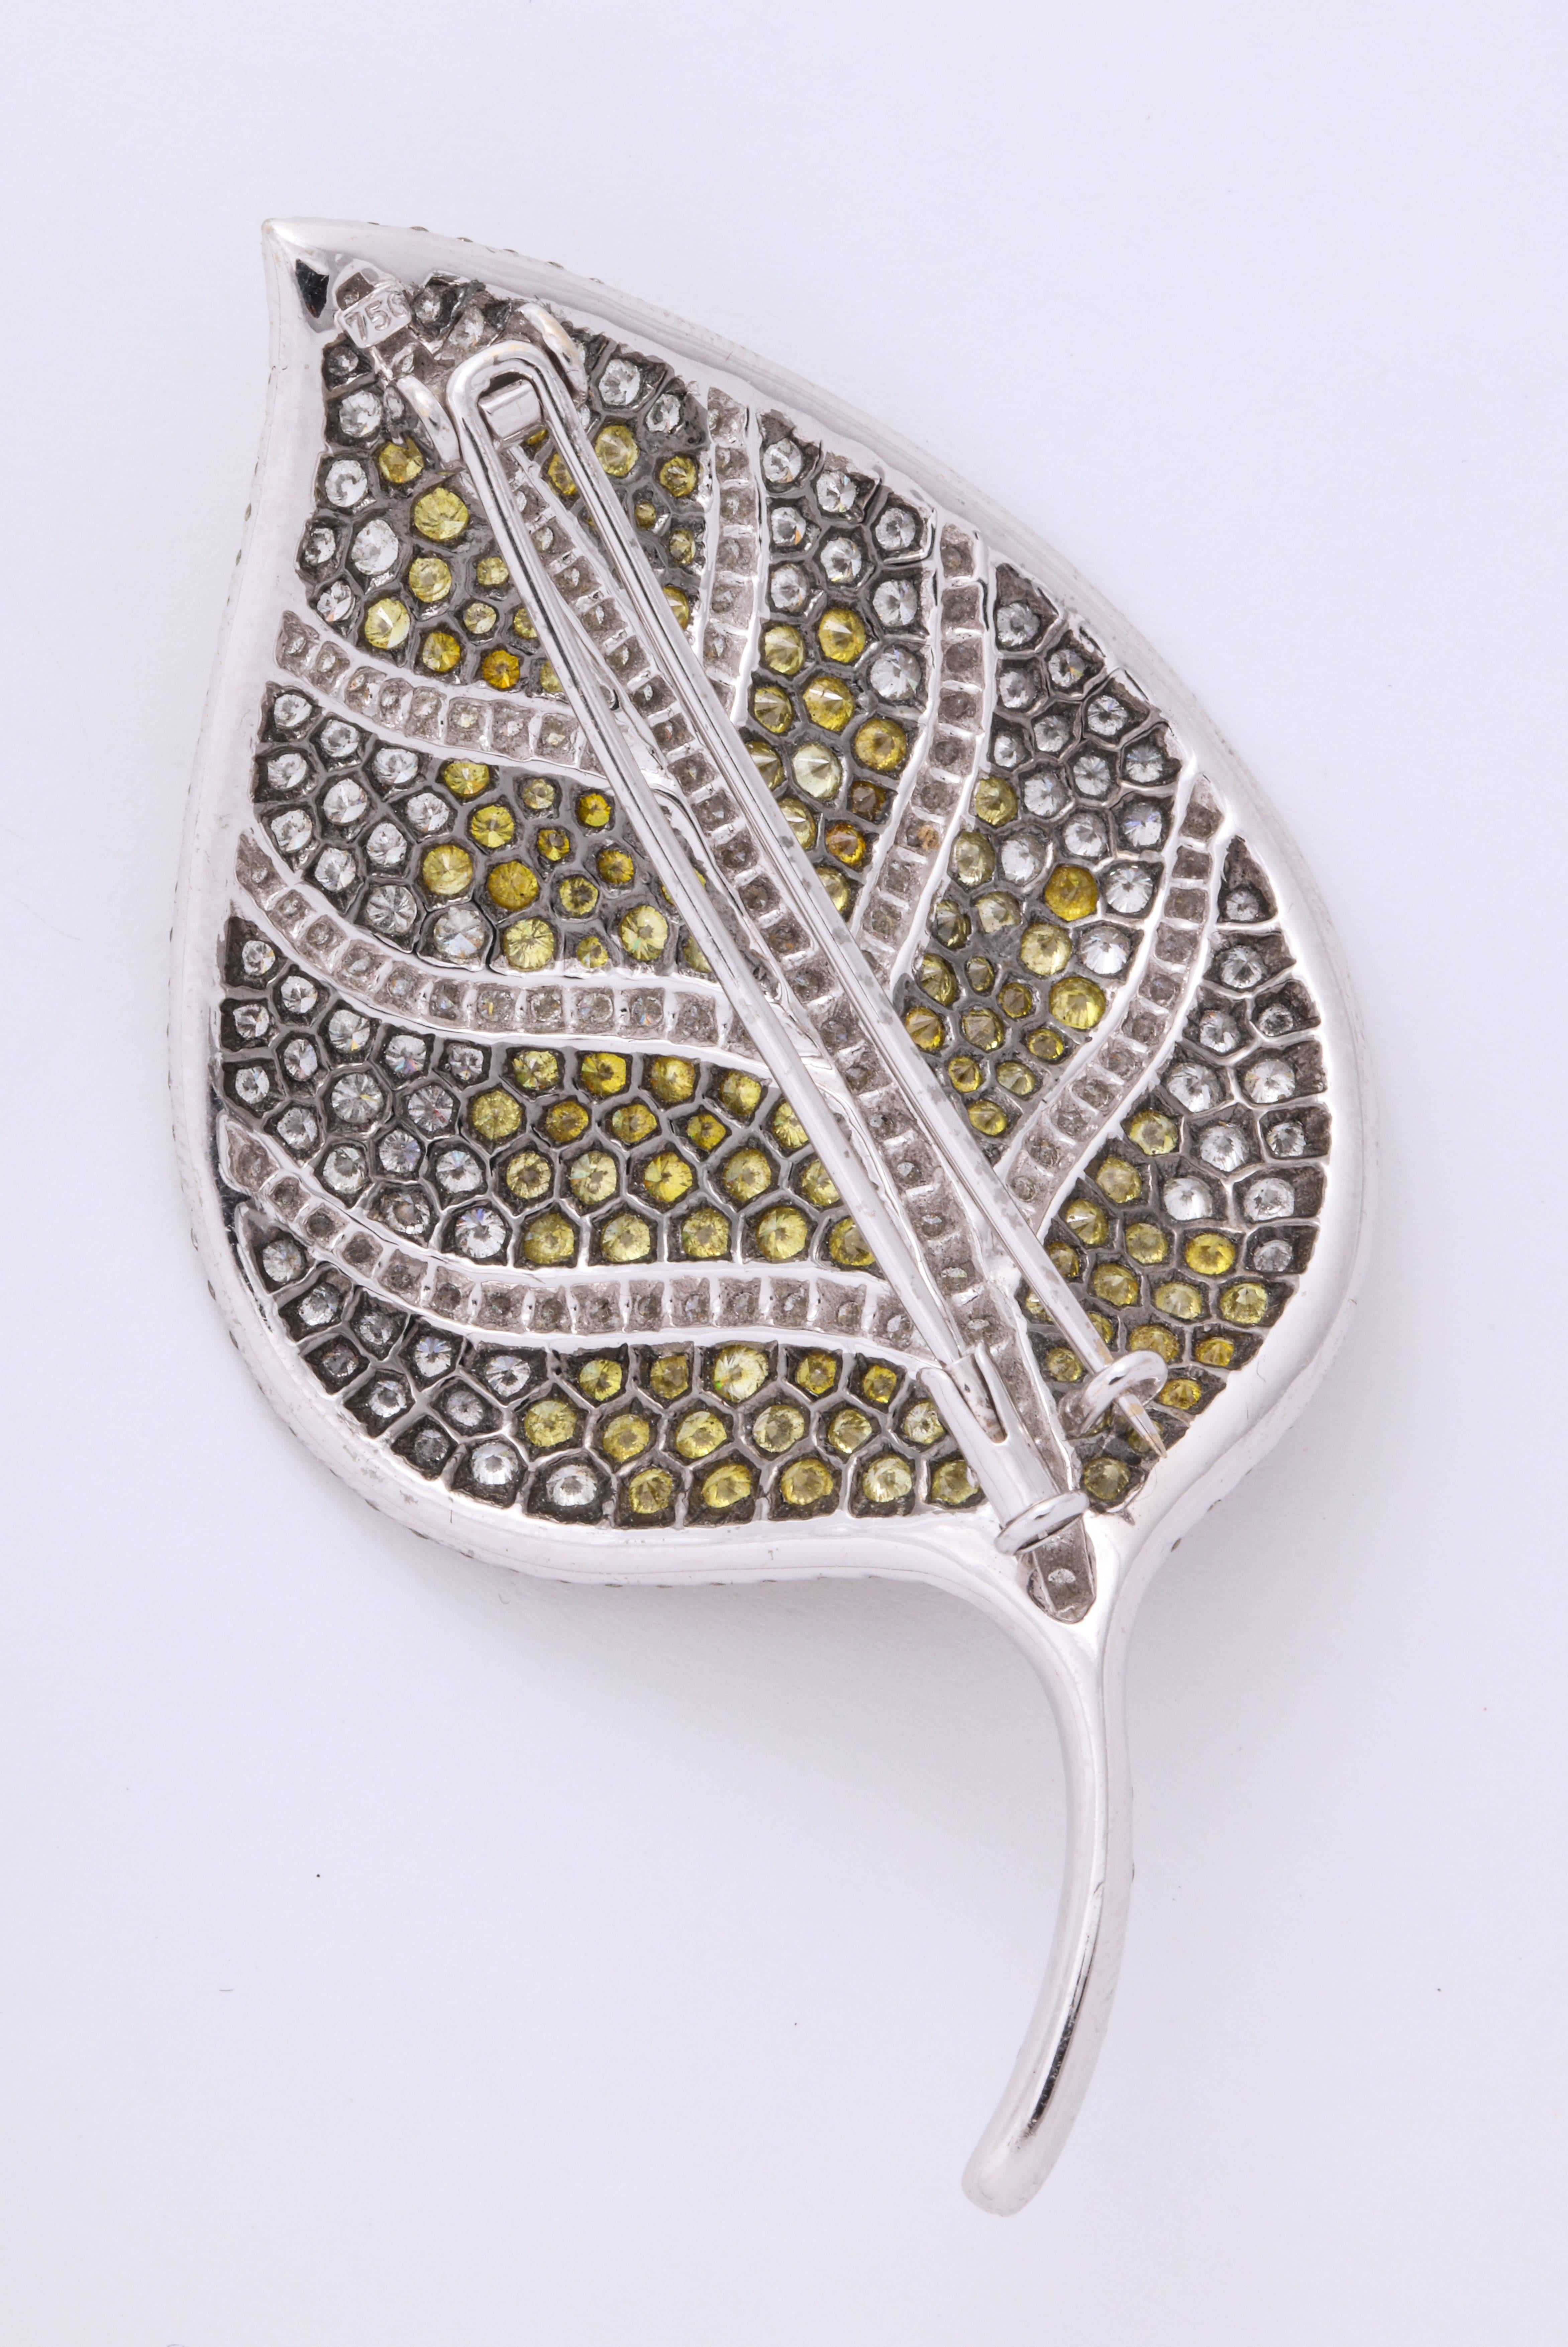 18 Karat white gold stylized gently curved leaf brooch decorated with pave'-set round brilliant-cut fancy yellow diamond striation: 4.86 carats and white diamonds surround: 3.22 carats, with an oxidized wash for the final burst of POP!
Dimensions: